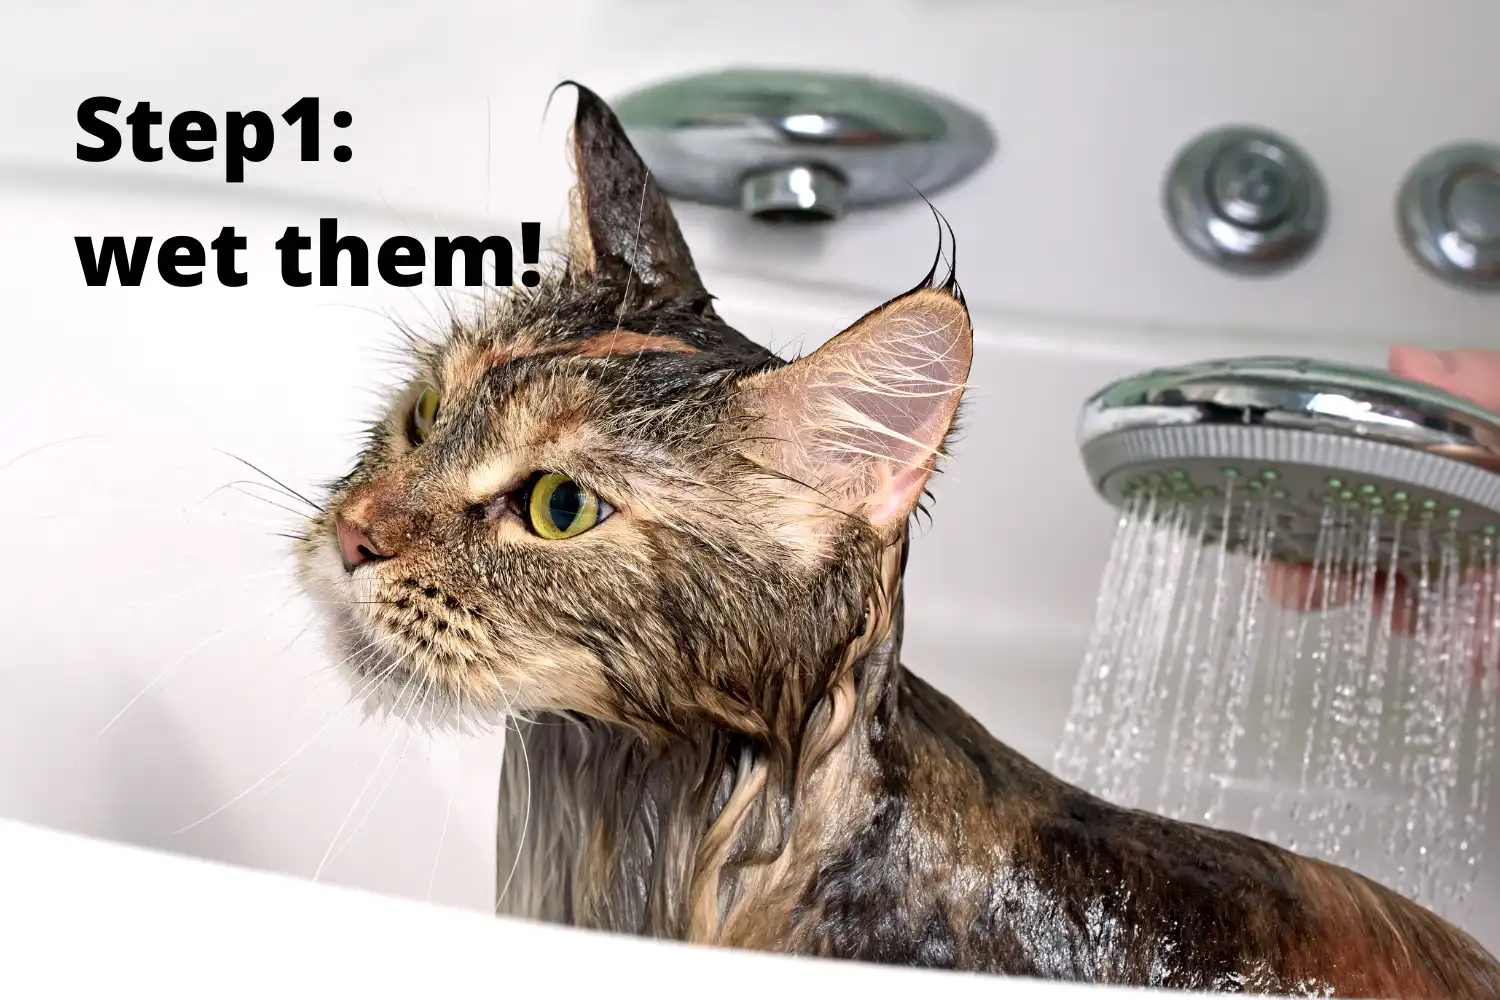 How to Bathe A Cat? - Step1: wet them!